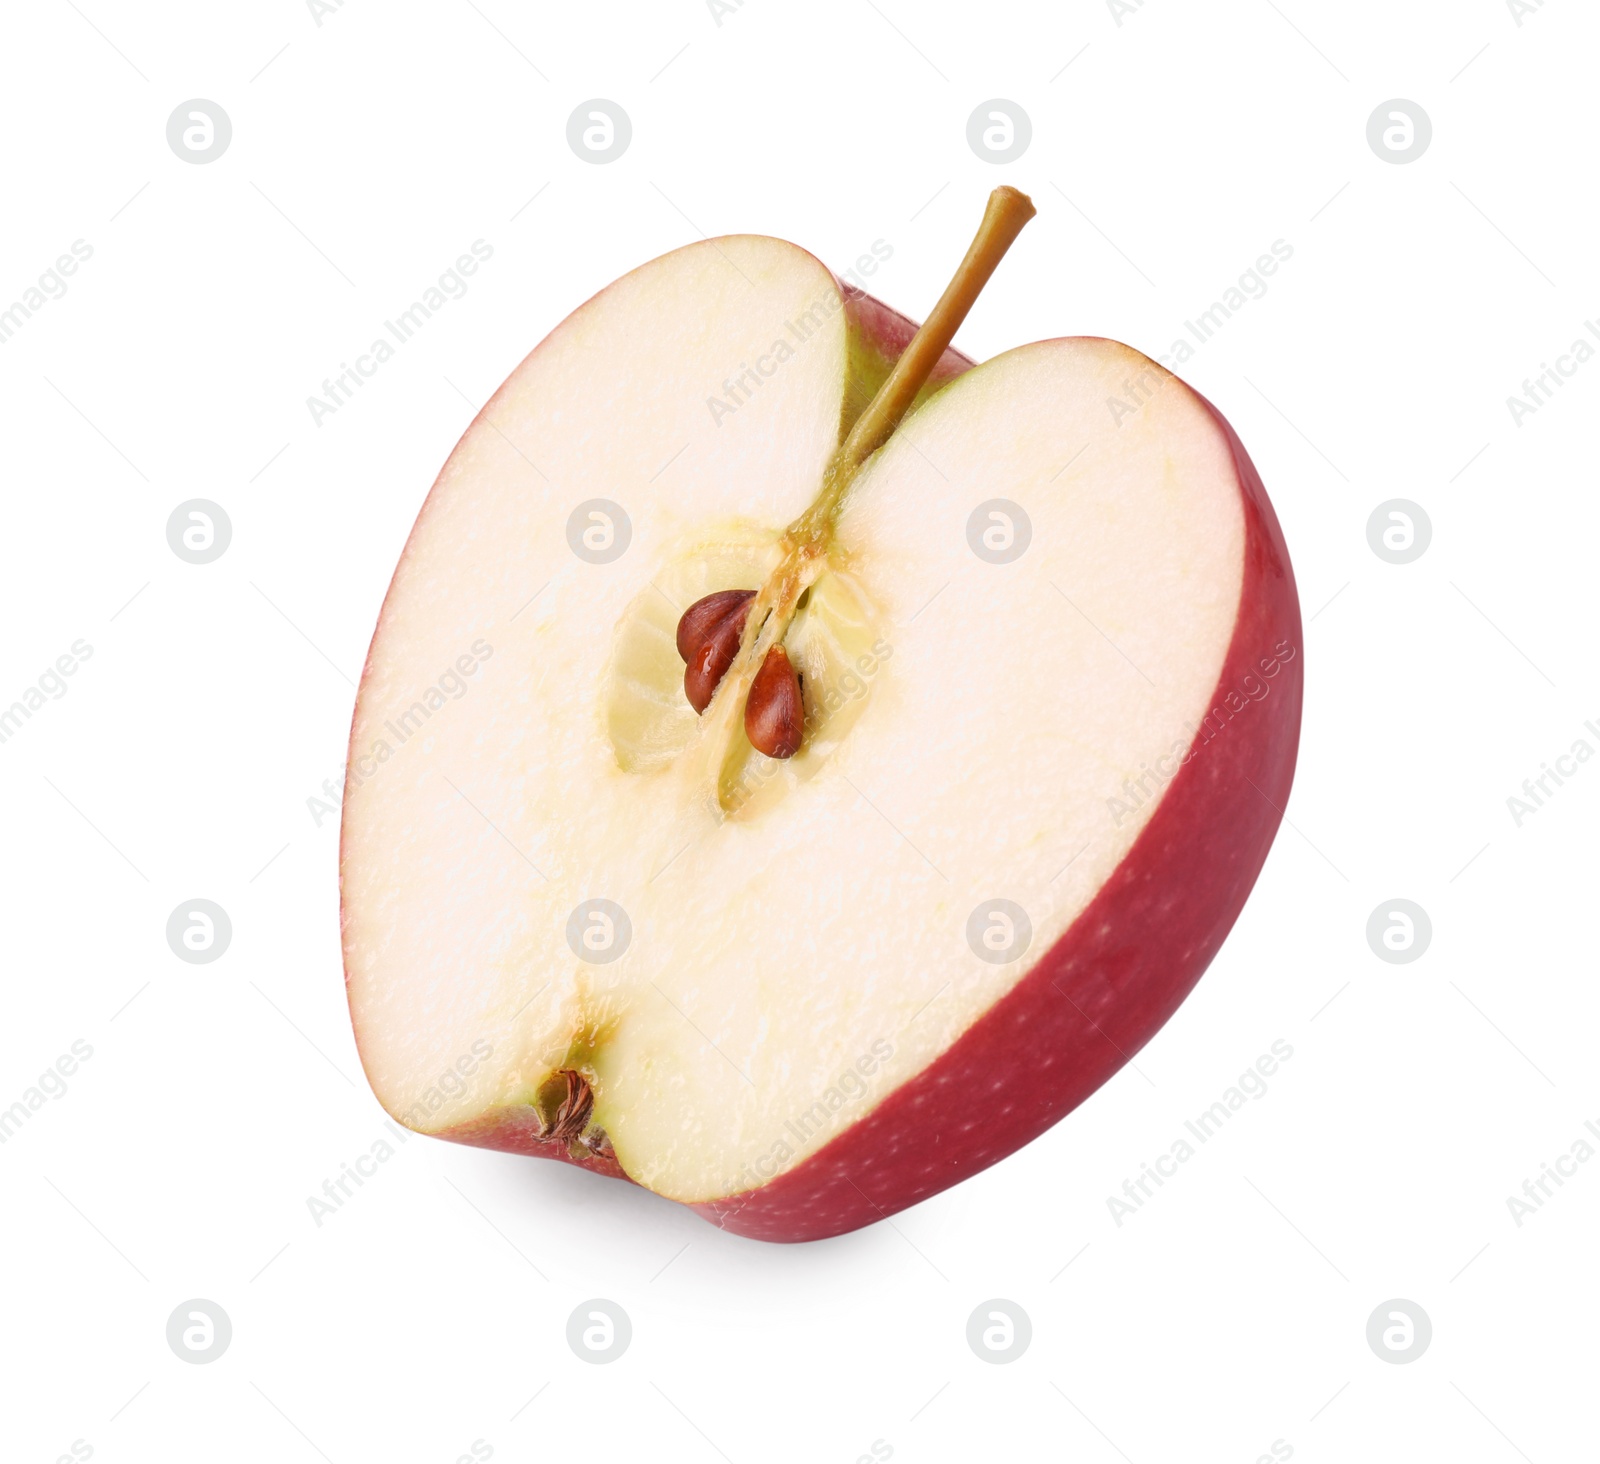 Photo of Half of ripe red apple isolated on white